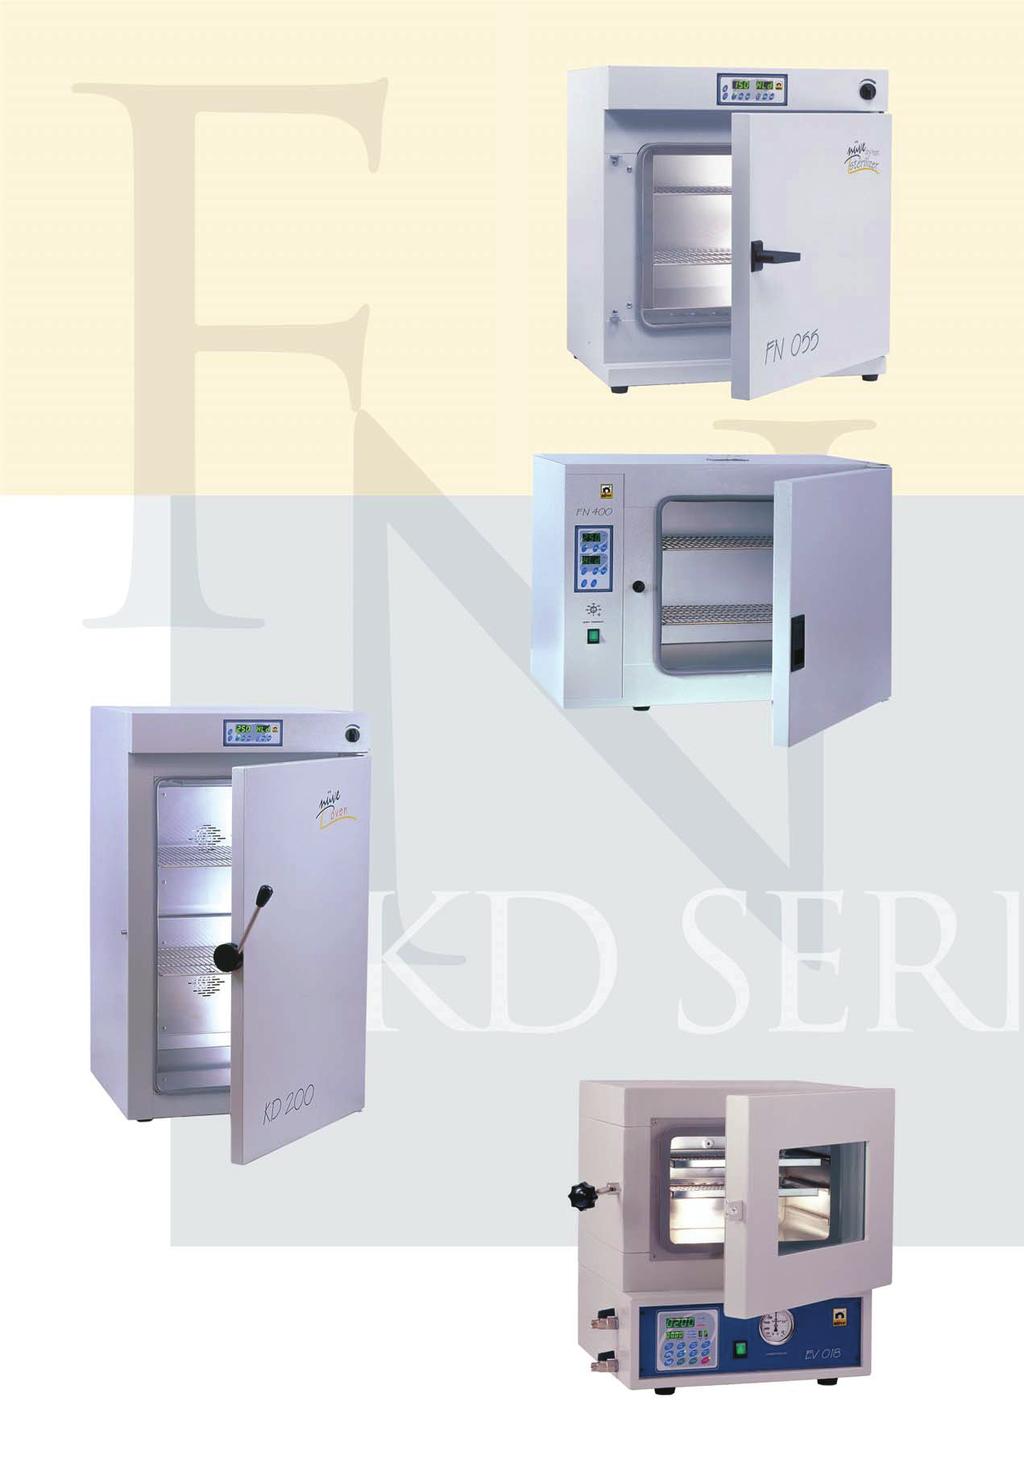 FN 032/055/120 DRY HEAT STERILIZERS / OVENS Three different sizes: 32, 55 and 120 liters. Temperature range: Ambient Temperature +5 C / 250 C. Designed for sterilization, drying and heating purposes.